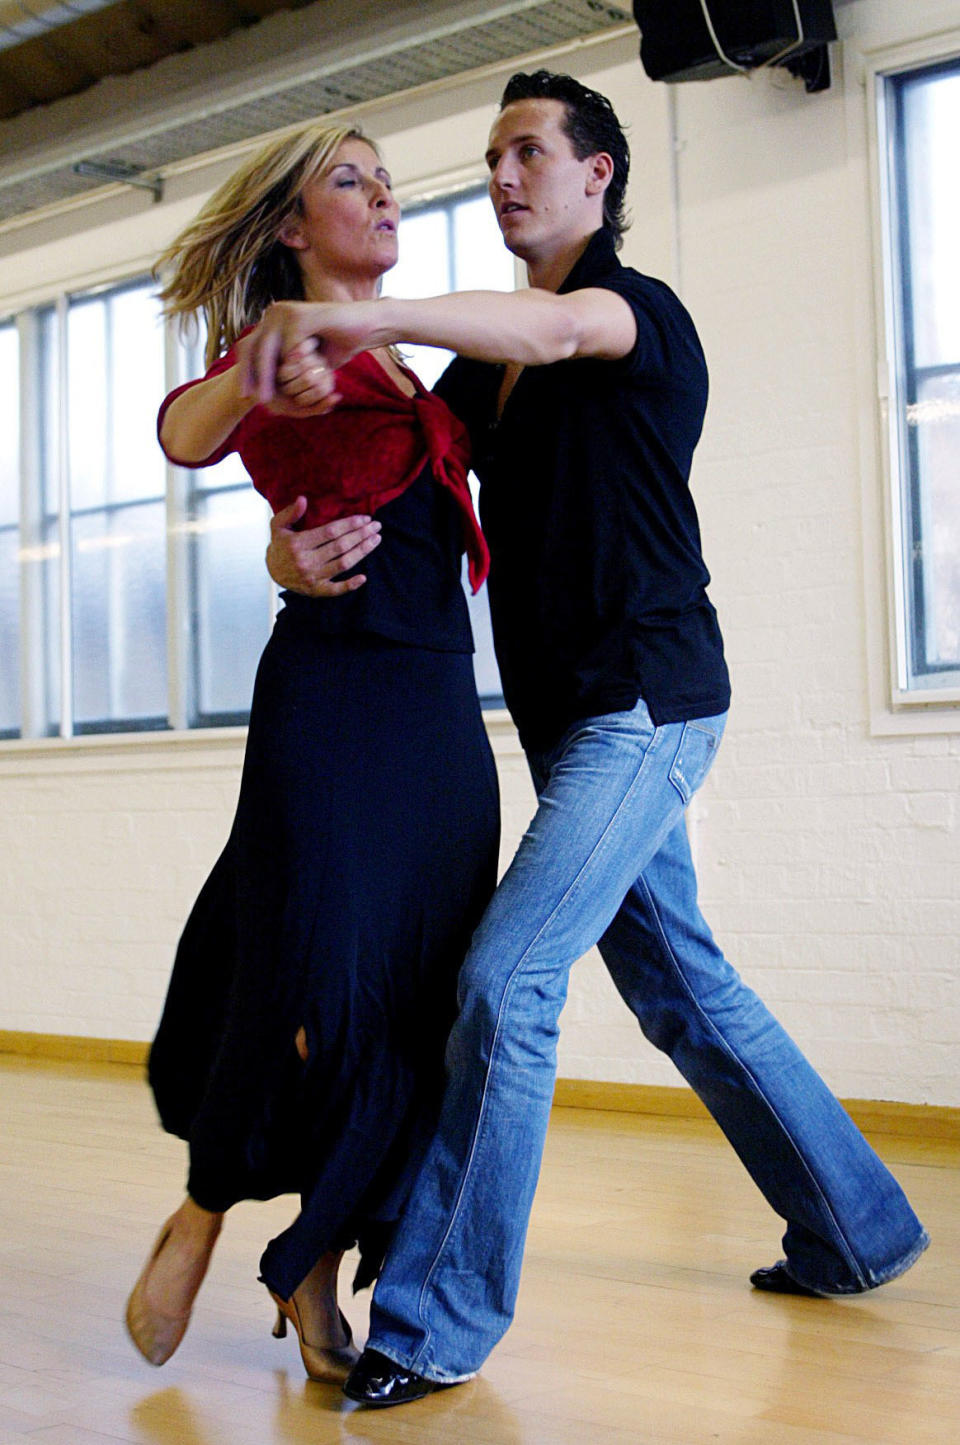 GMTV presenter Fiona Phillips trains for Strictly Ballroom with the help of her dance partner Brendon Cole October 2005